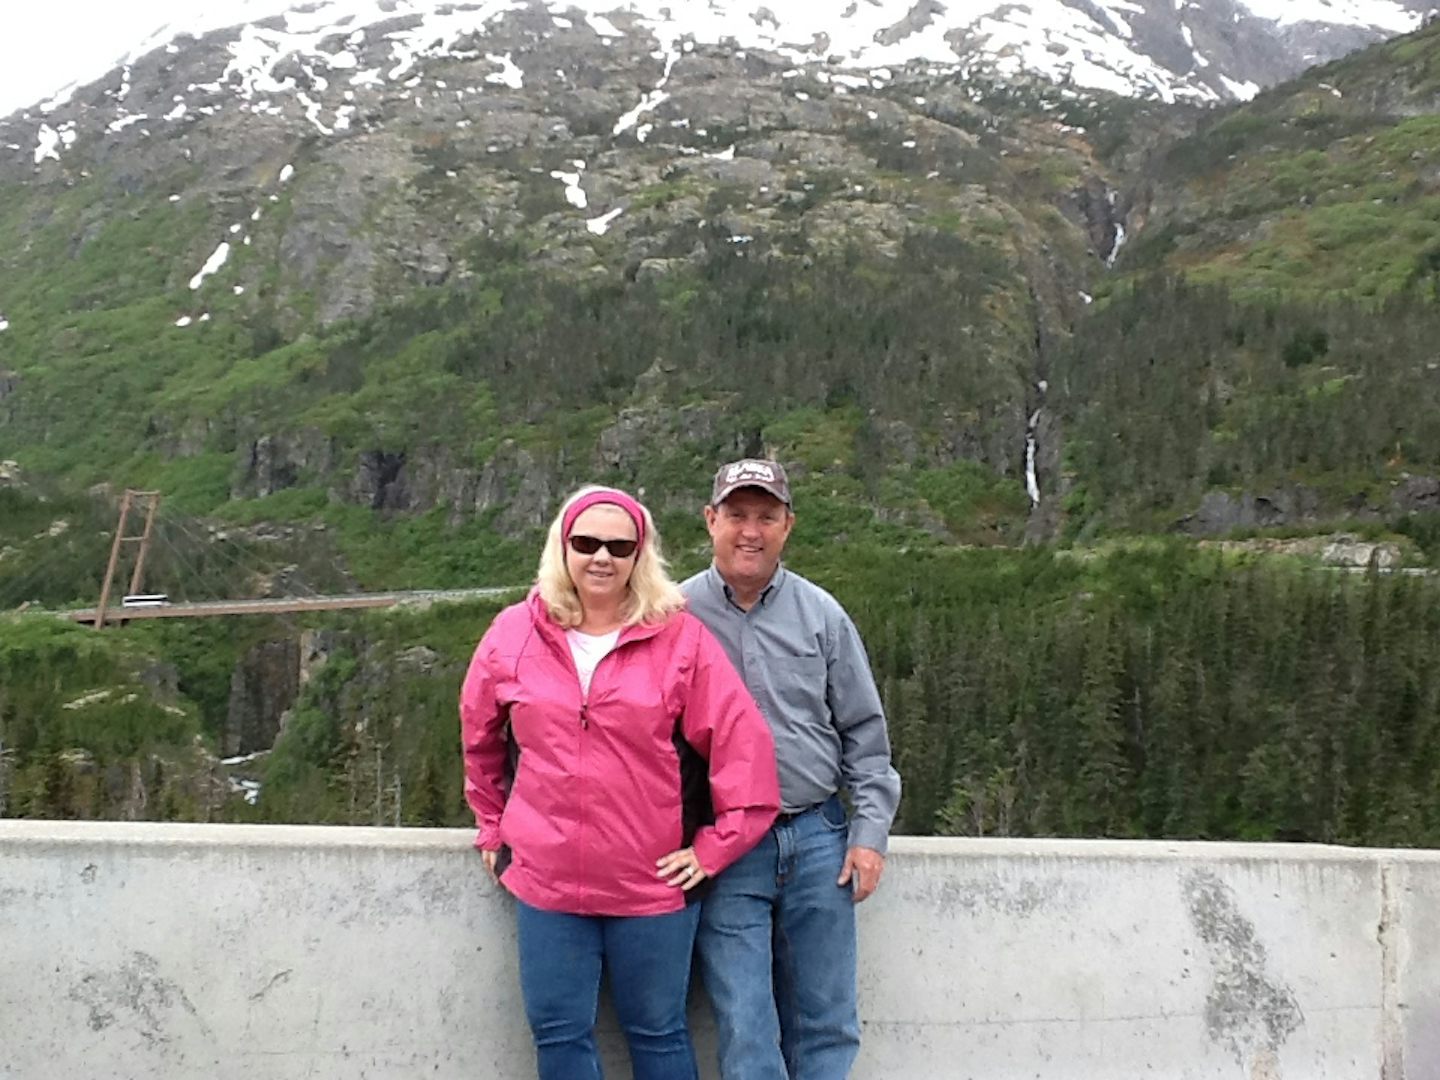 On the way from Skagway to Yukon Territory. Suspension bridge in the background